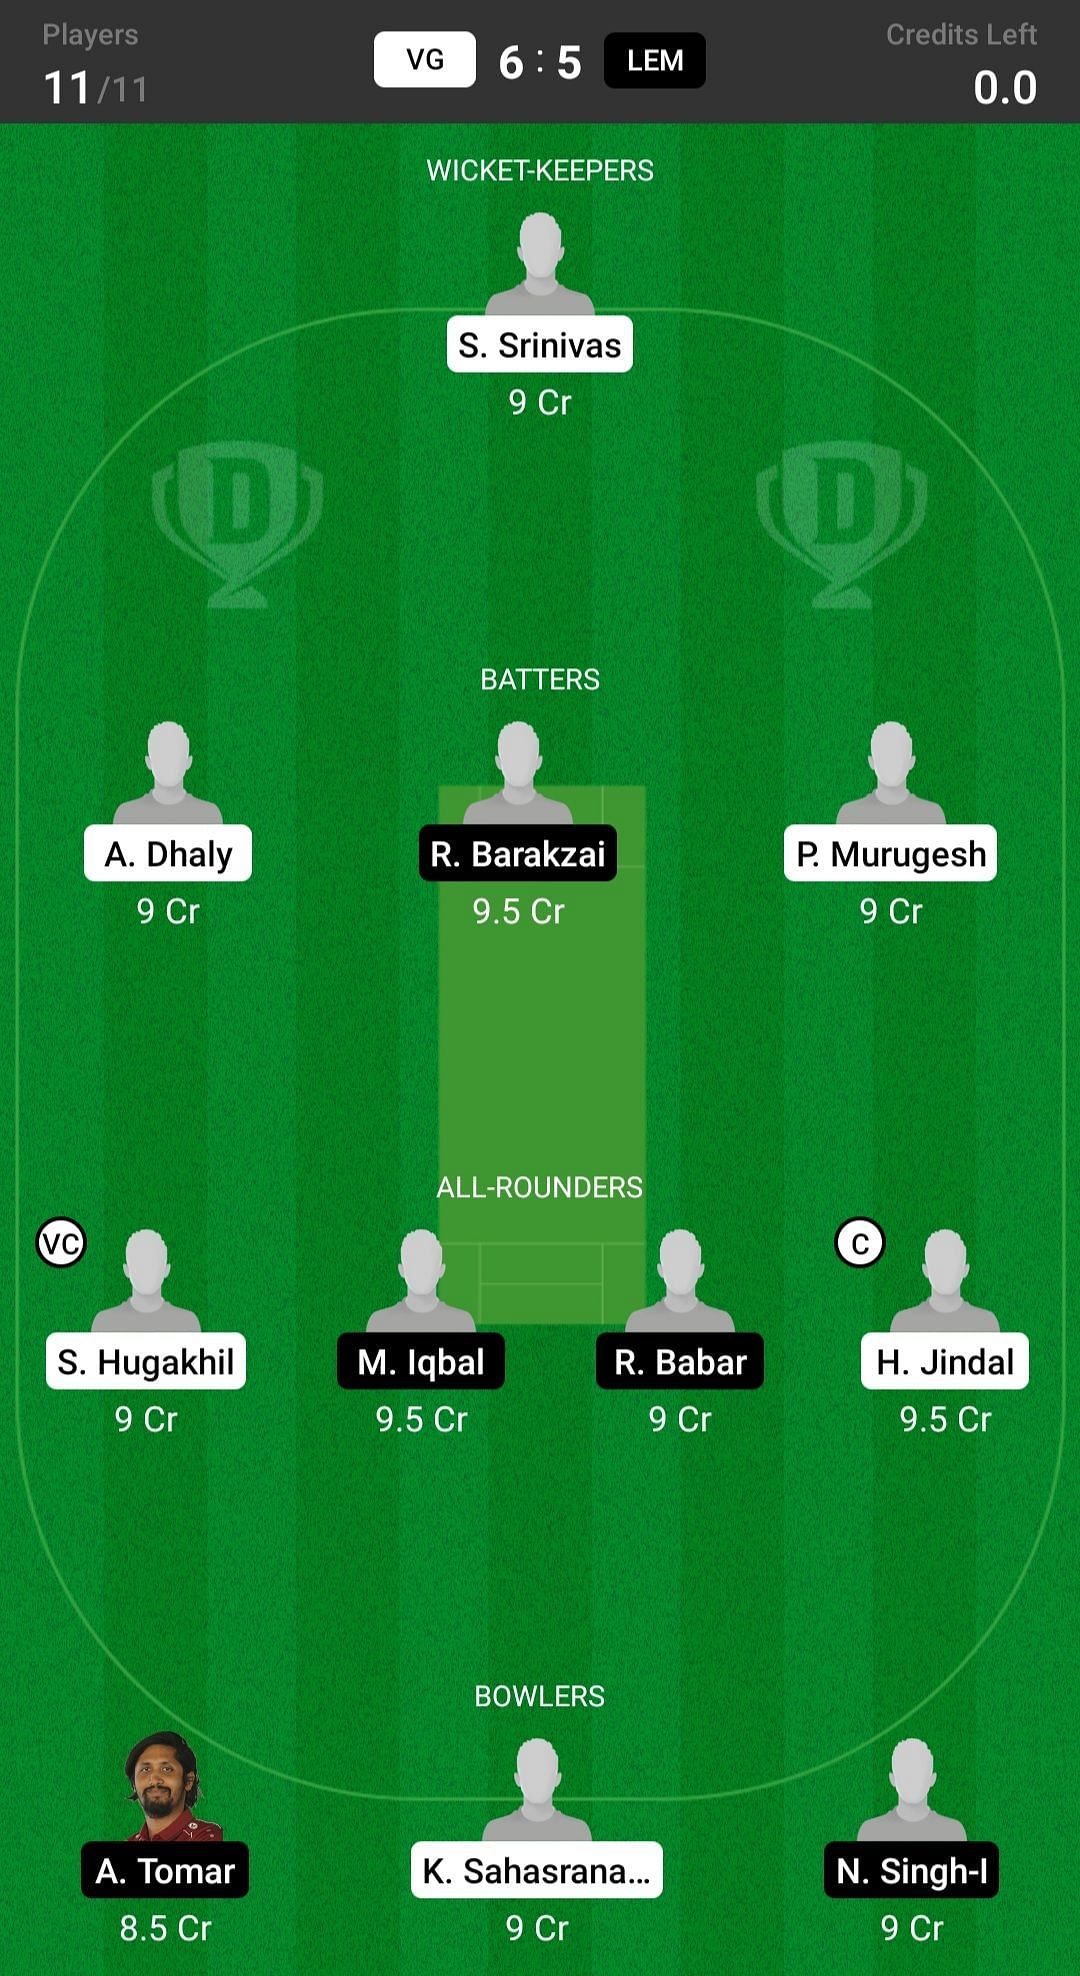 VG vs LEM Dream11 Prediction Fantasy Cricket Tips, Todays Playing 11s and Pitch Report for FanCode ECS T10 Krefeld, Match 23 and 24